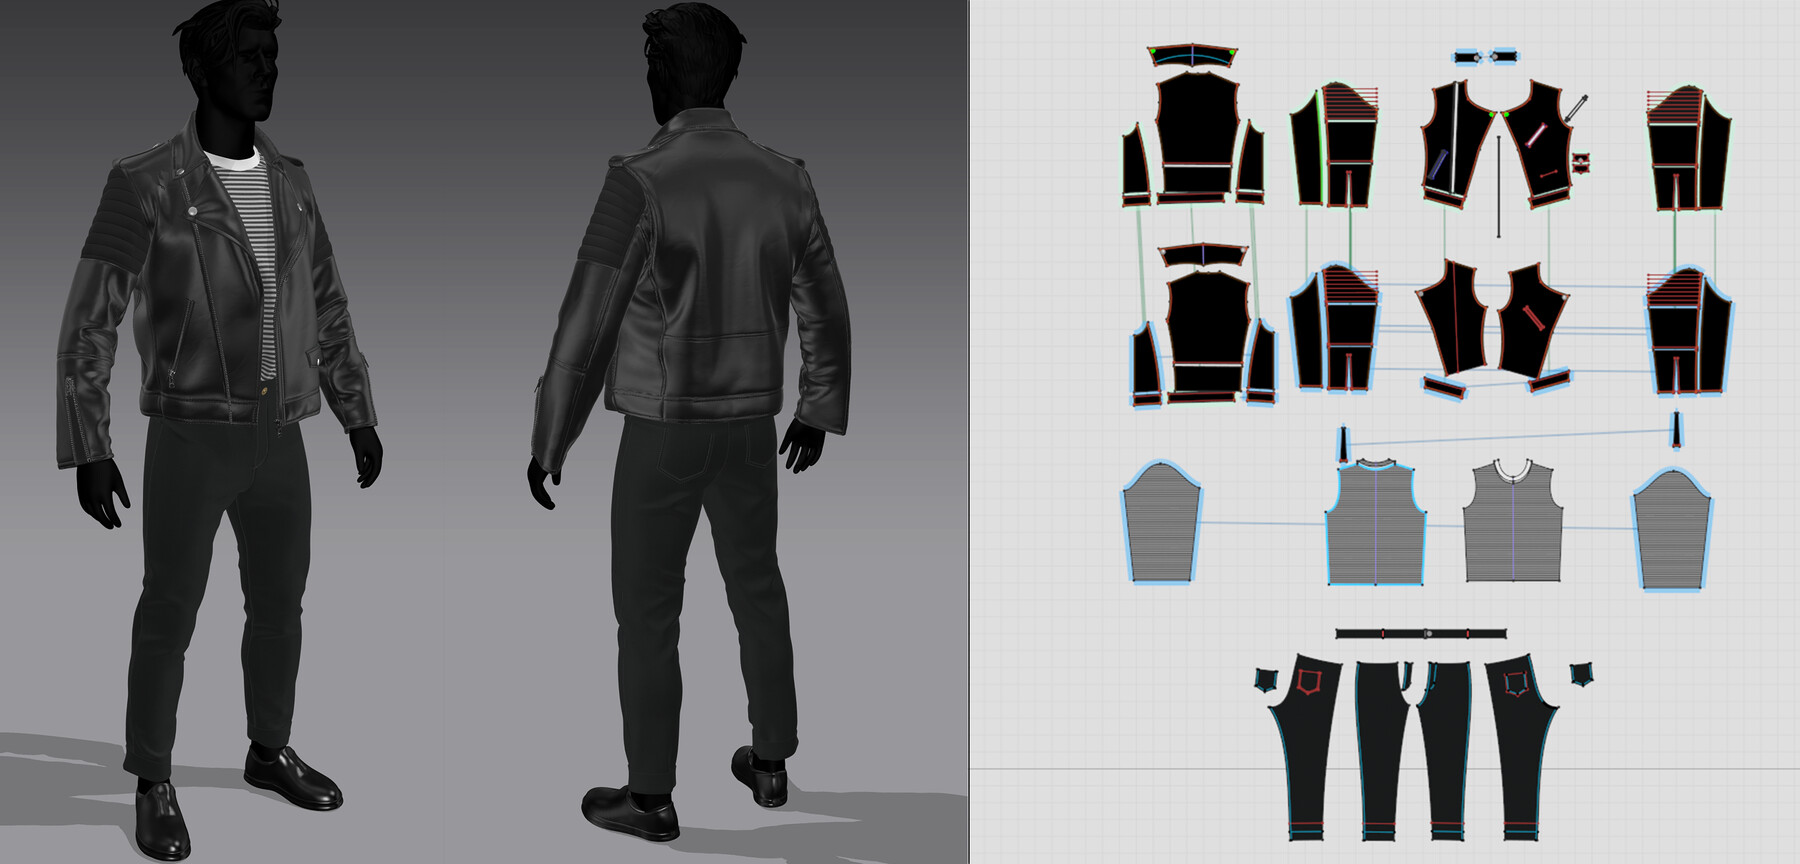 ArtStation - Leather Jacket Outfit | Game Assets